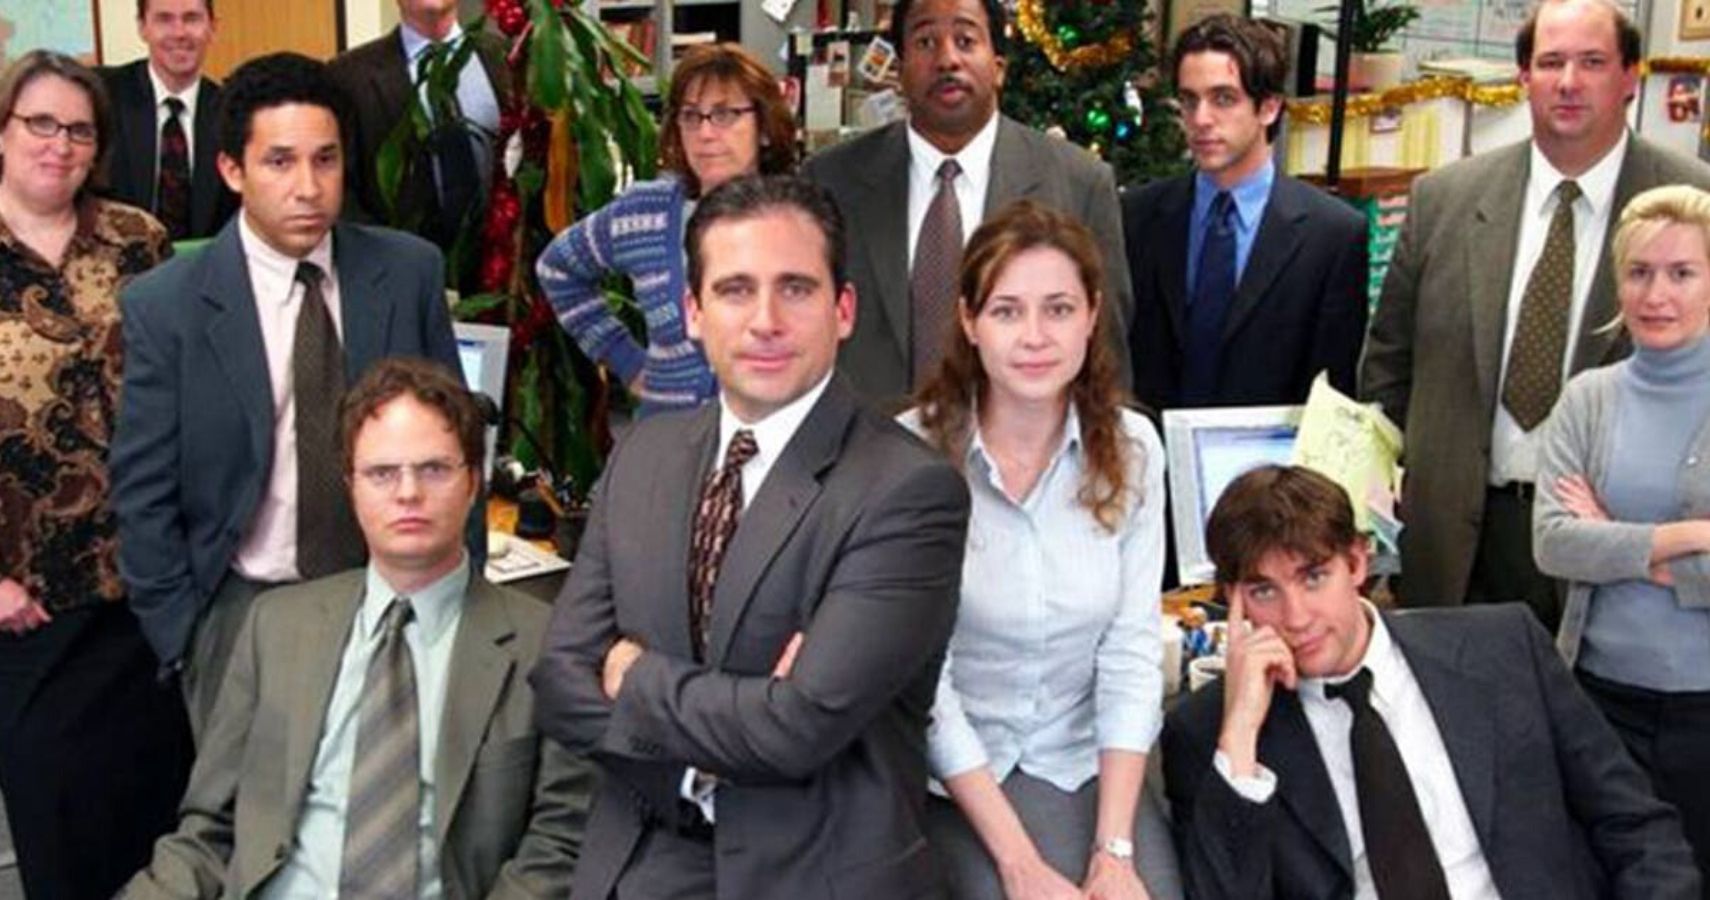 How was the Dunder Mifflin Scranton branch the most profitable